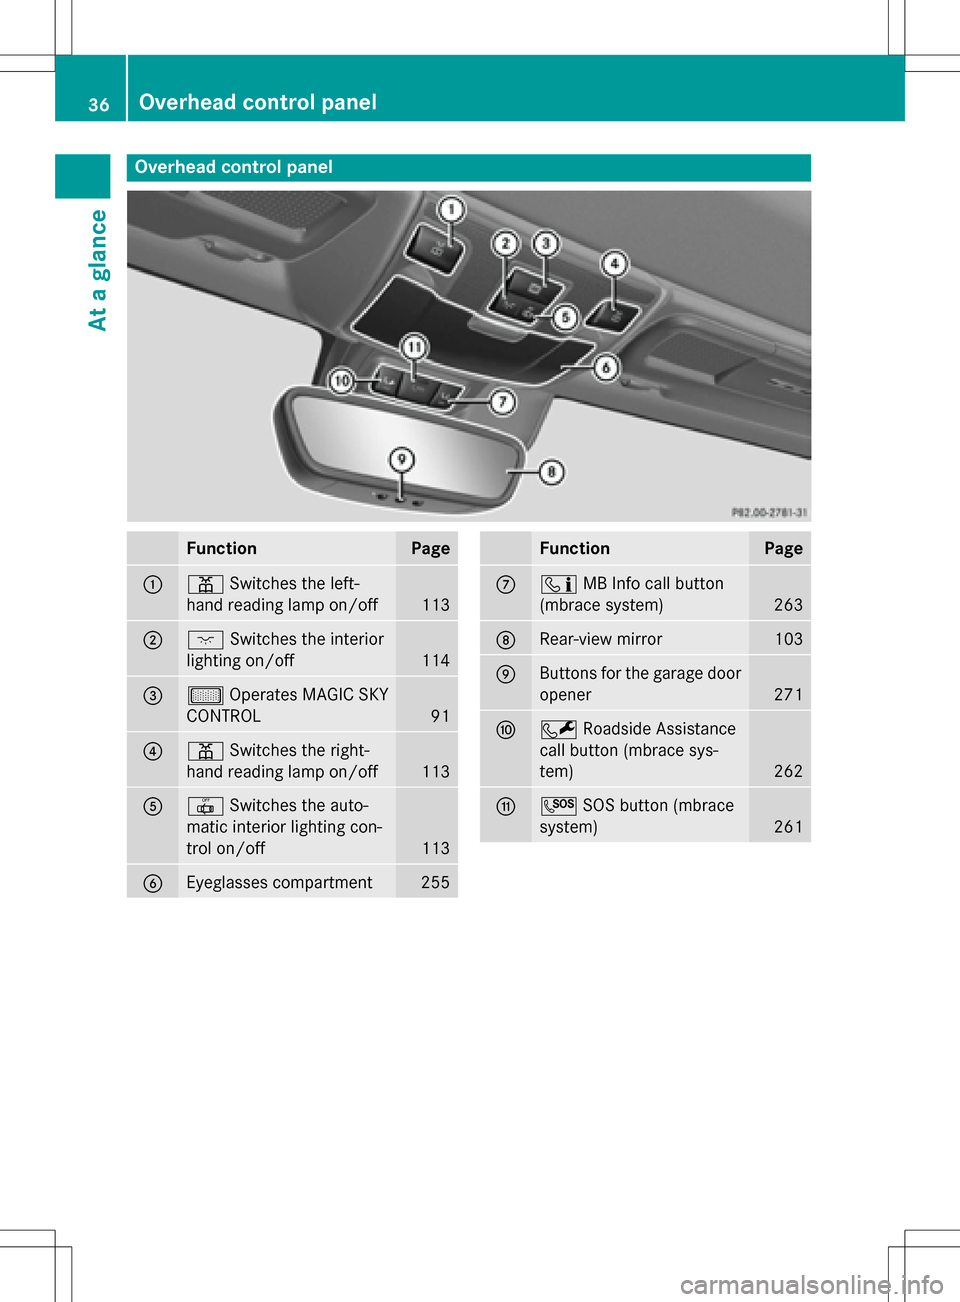 MERCEDES-BENZ SLK-Class 2016 R172 Owners Manual Overhead control panel
FunctionPage
:pSwitches the left-
hand reading lamp on/off
113
;c Switches the interior
lighting on/off
114
=µ Operates MAGIC SKY
CONTROL
91
?p Switches the right-
hand reading